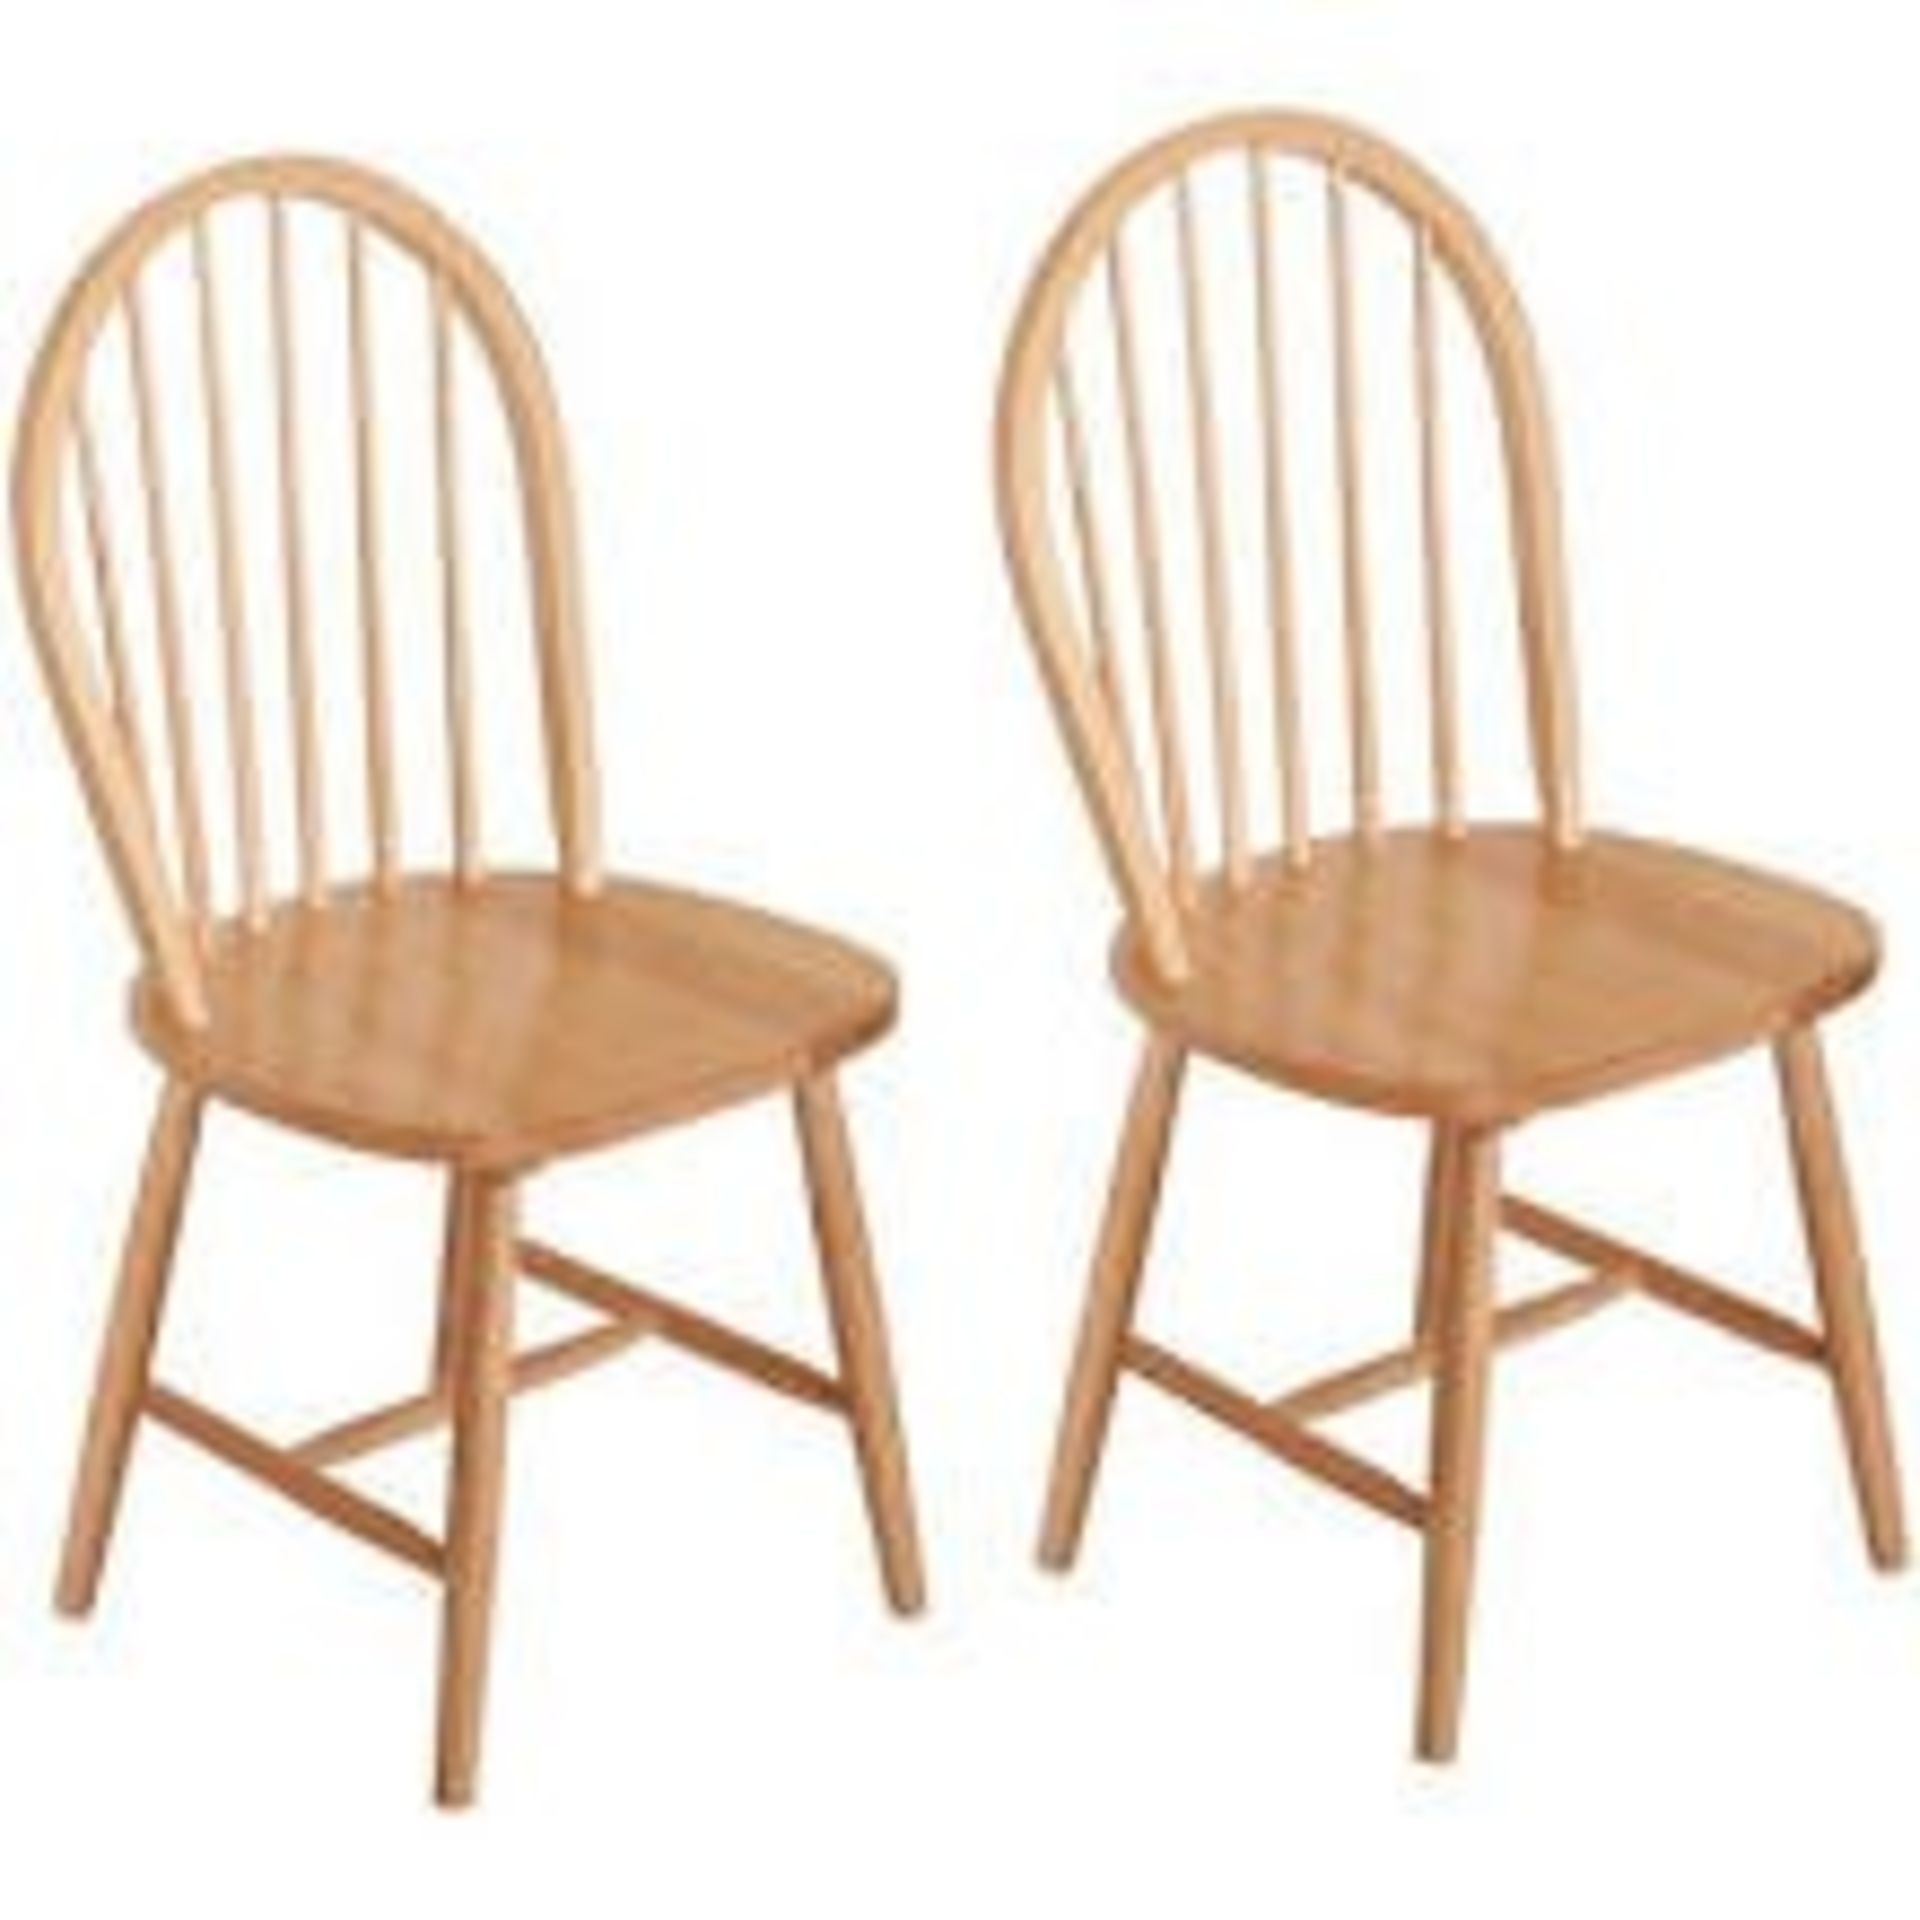 2 BRAND NEW BOXED DEBENHAMS WINDSOR DINING CHAIRS IN HONEY / RRP £88.00 (VIEWING HIGHLY